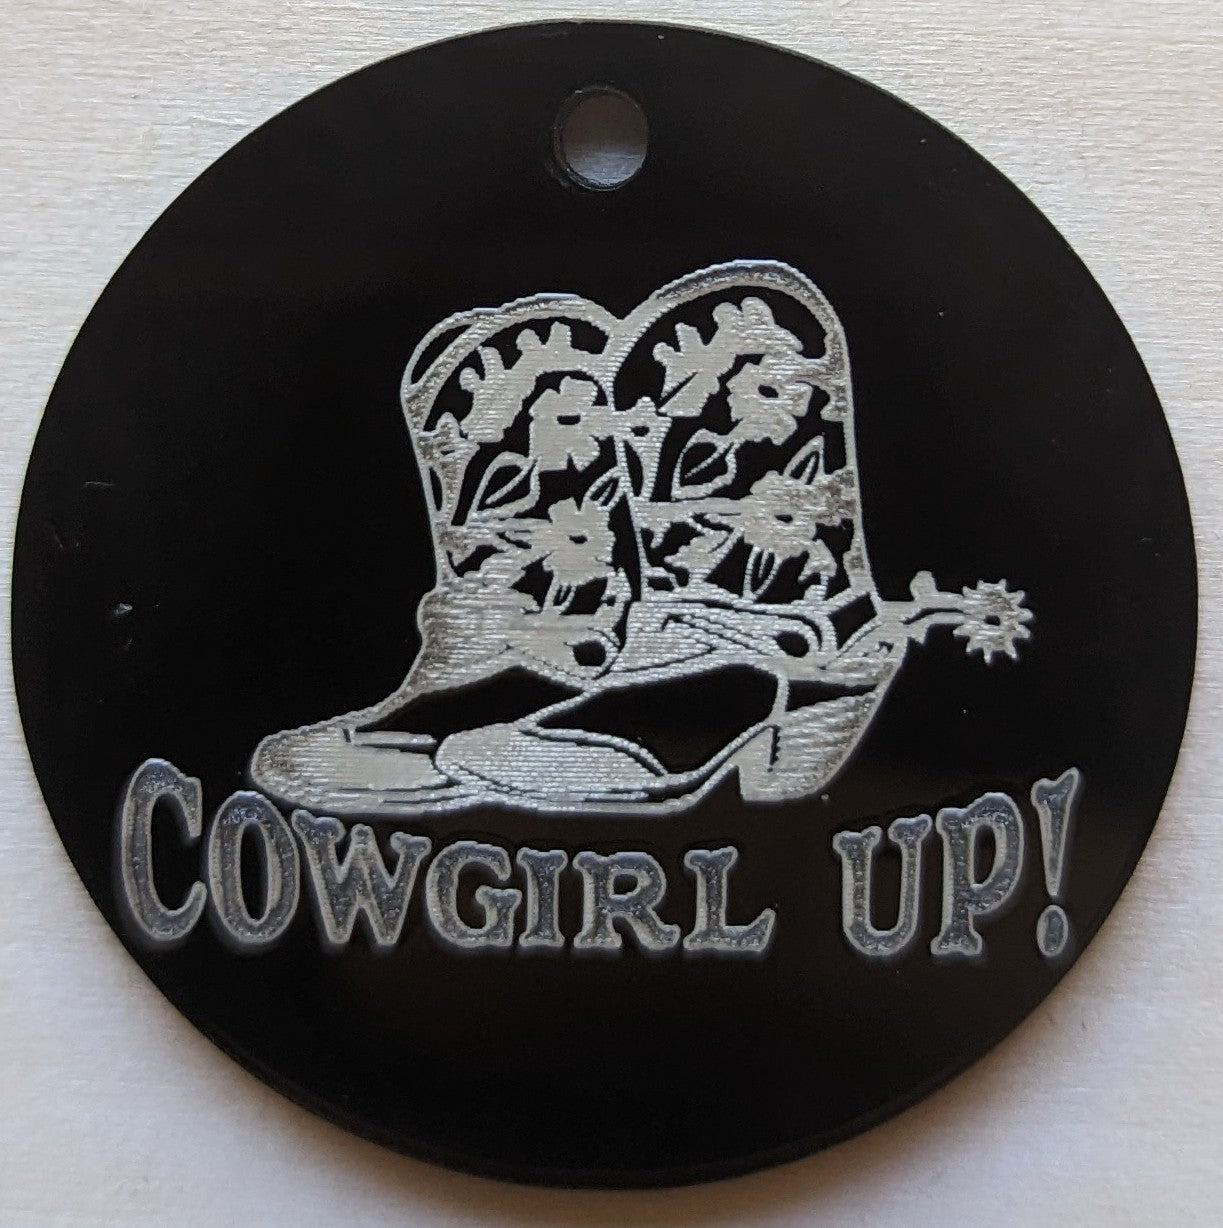 cowgirl up in cursive writhing